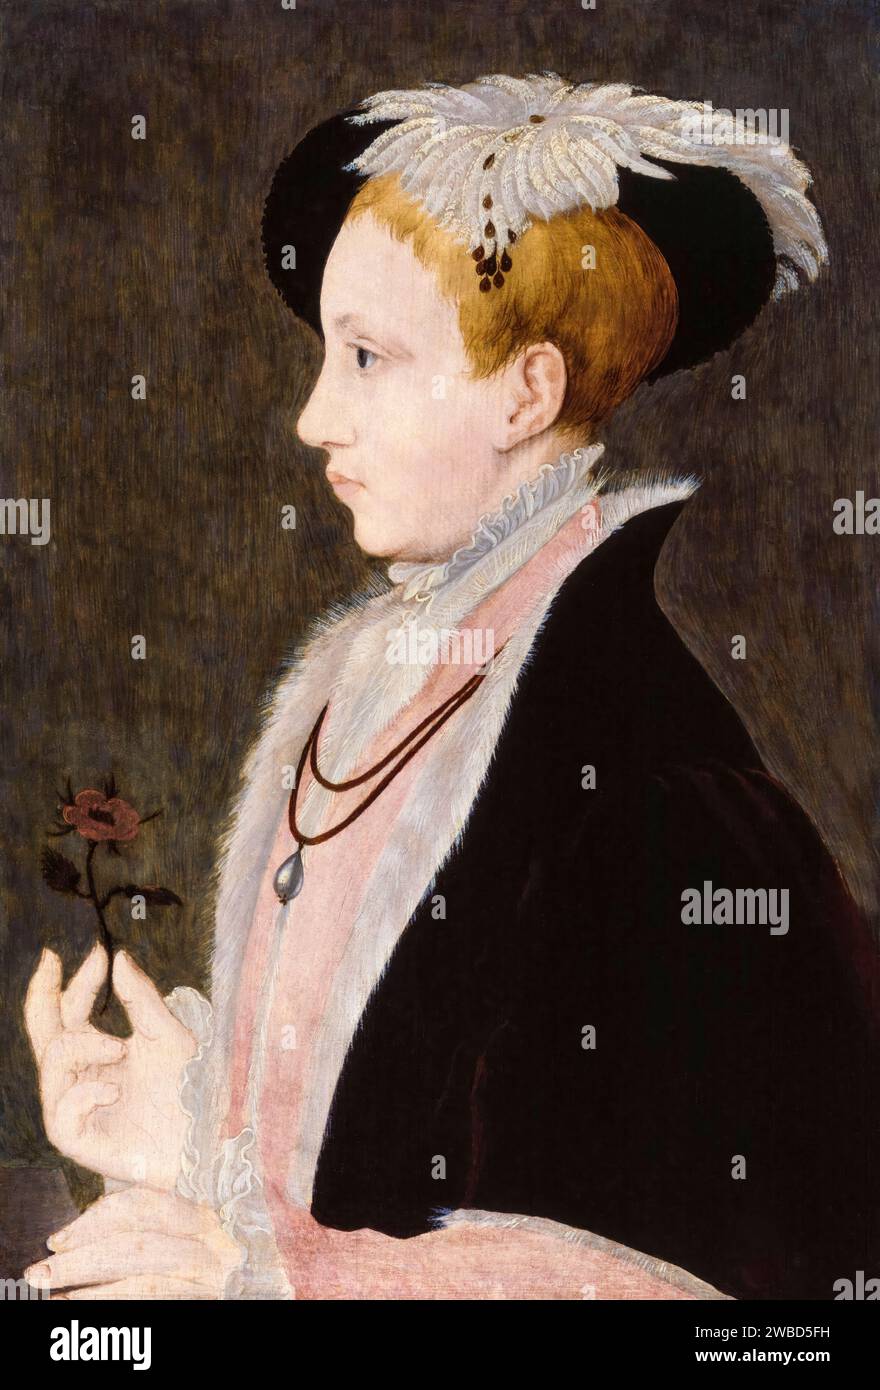 Edward VI (1537-1553), King of England and Ireland (1547-1553), portrait painting in oil on panel after William Scrots, circa 1546 Stock Photo